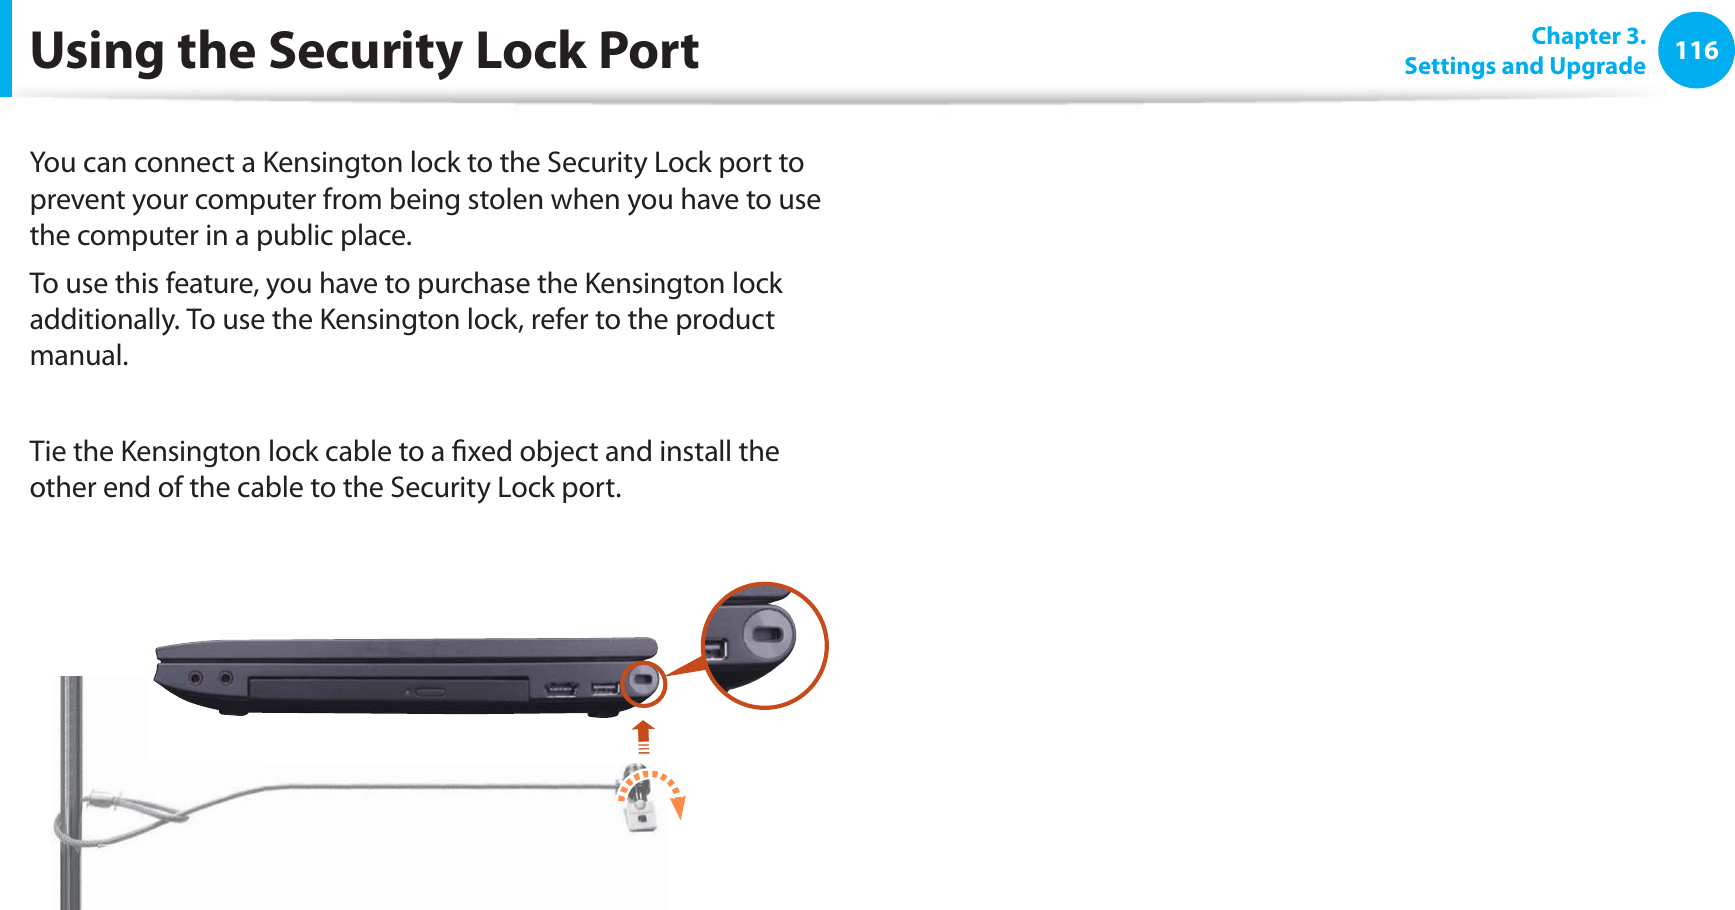 116Chapter 3. Settings and UpgradeUsing the Security Lock PortYou can connect a Kensington lock to the Security Lock port to prevent your computer from being stolen when you have to use the computer in a public place.To use this feature, you have to purchase the Kensington lock additionally. To use the Kensington lock, refer to the product manual.Tie the Kensington lock cable to a ﬁxed object and install the other end of the cable to the Security Lock port.